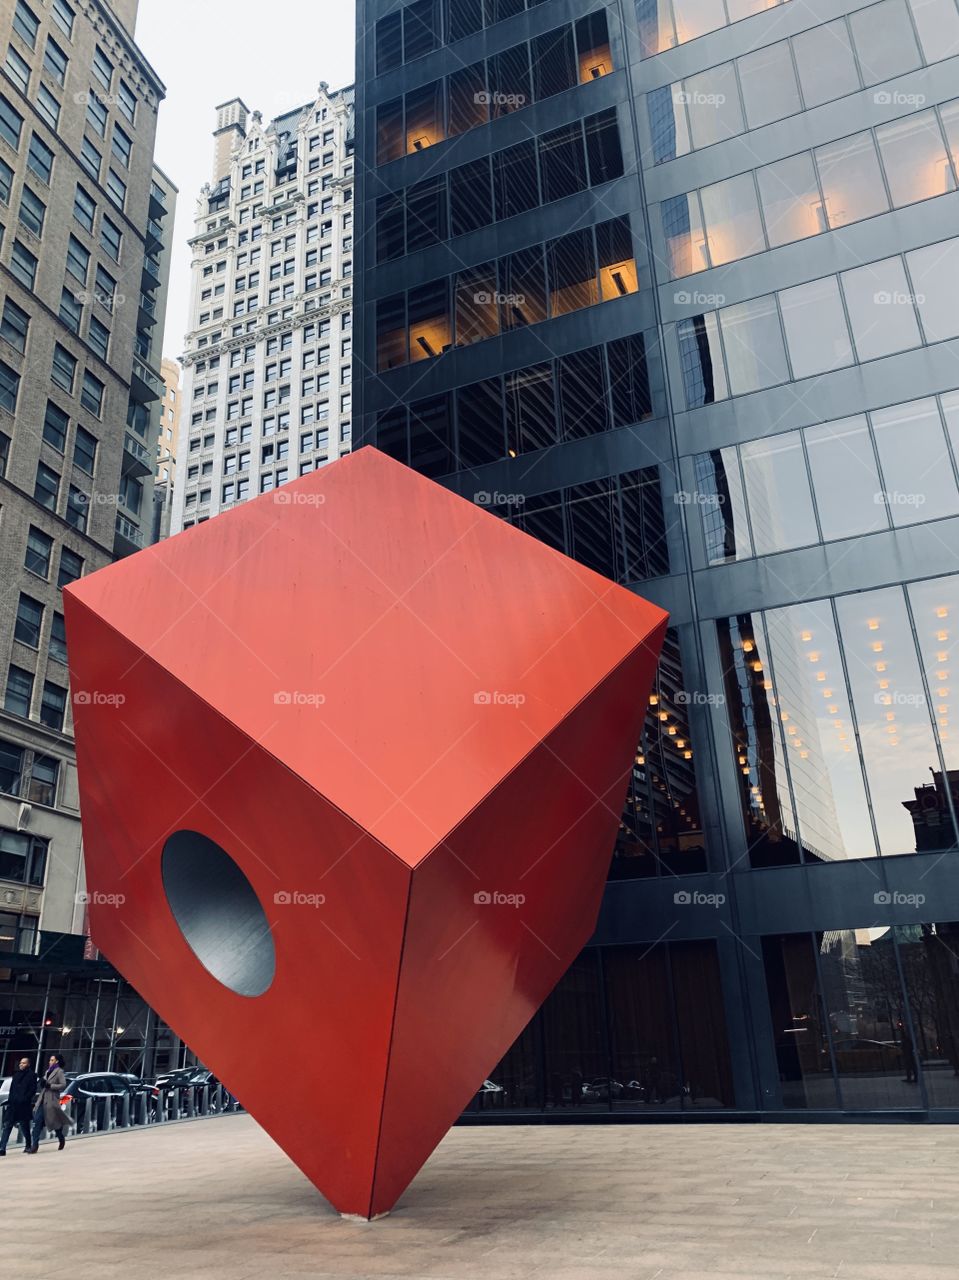 The Red Cube at Zuccotti Park, Wall Street! 